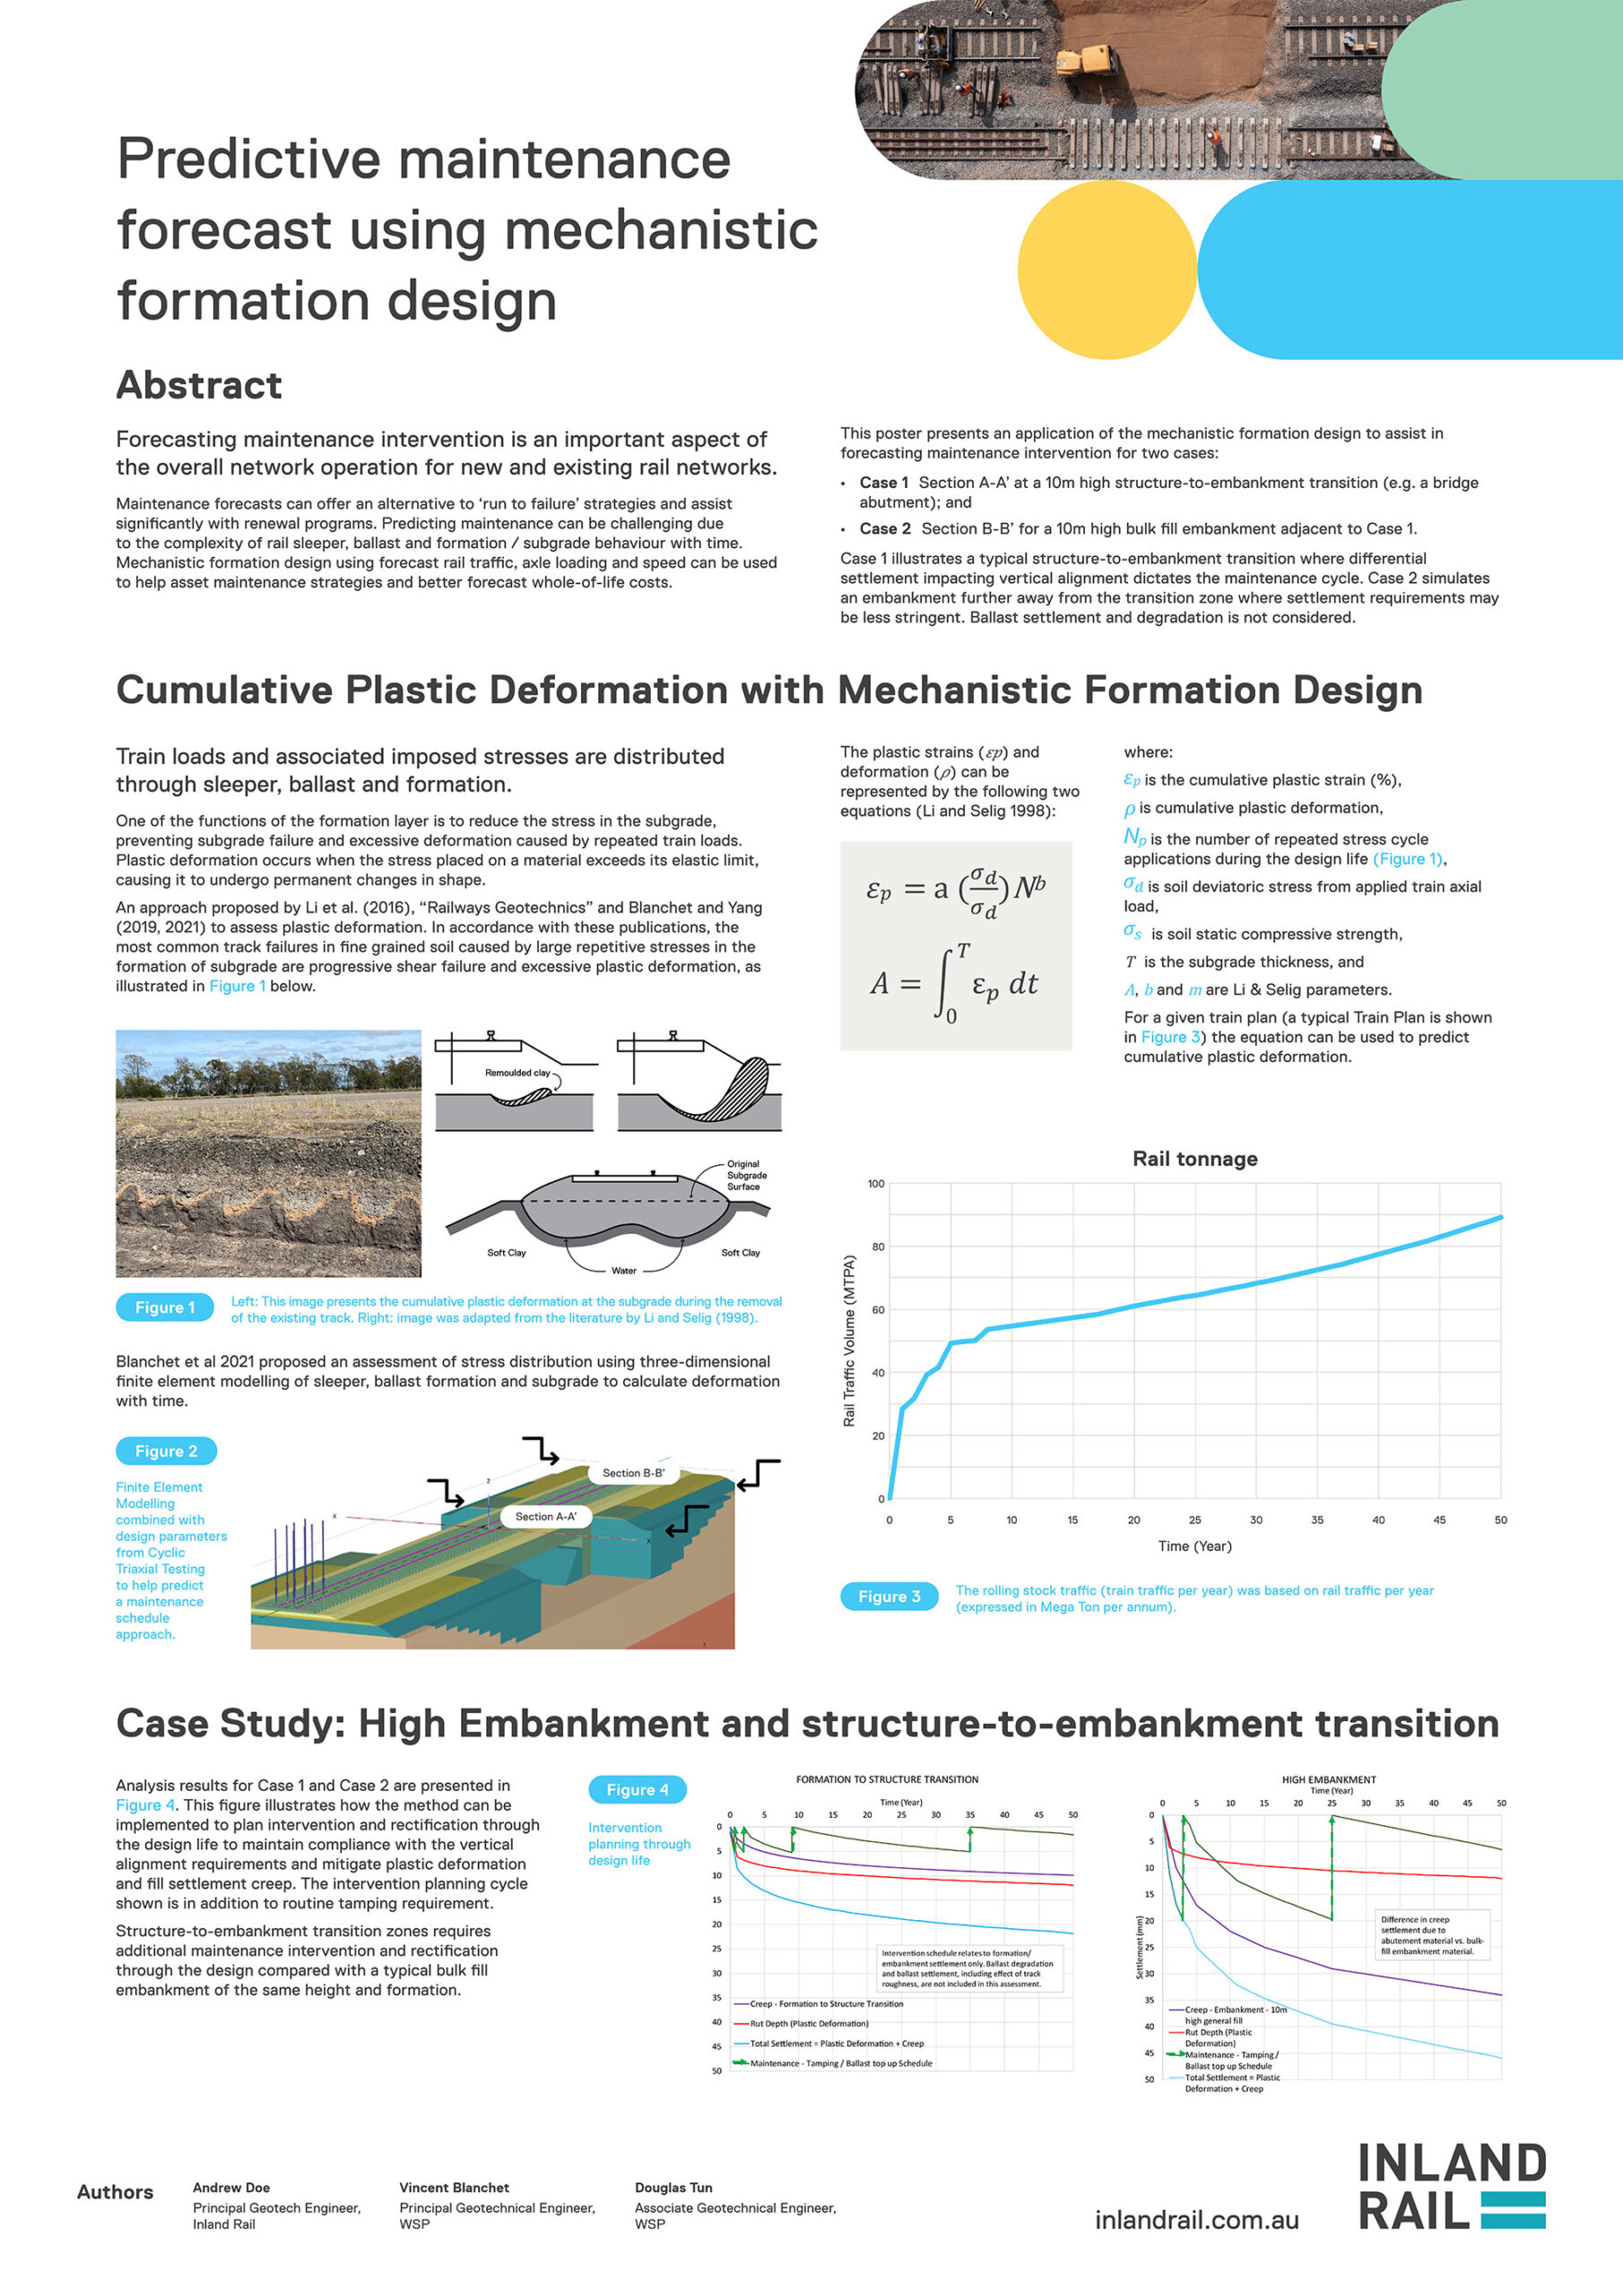 Image thumbnail for Predictive maintenance forecast using mechanistic formation design poster